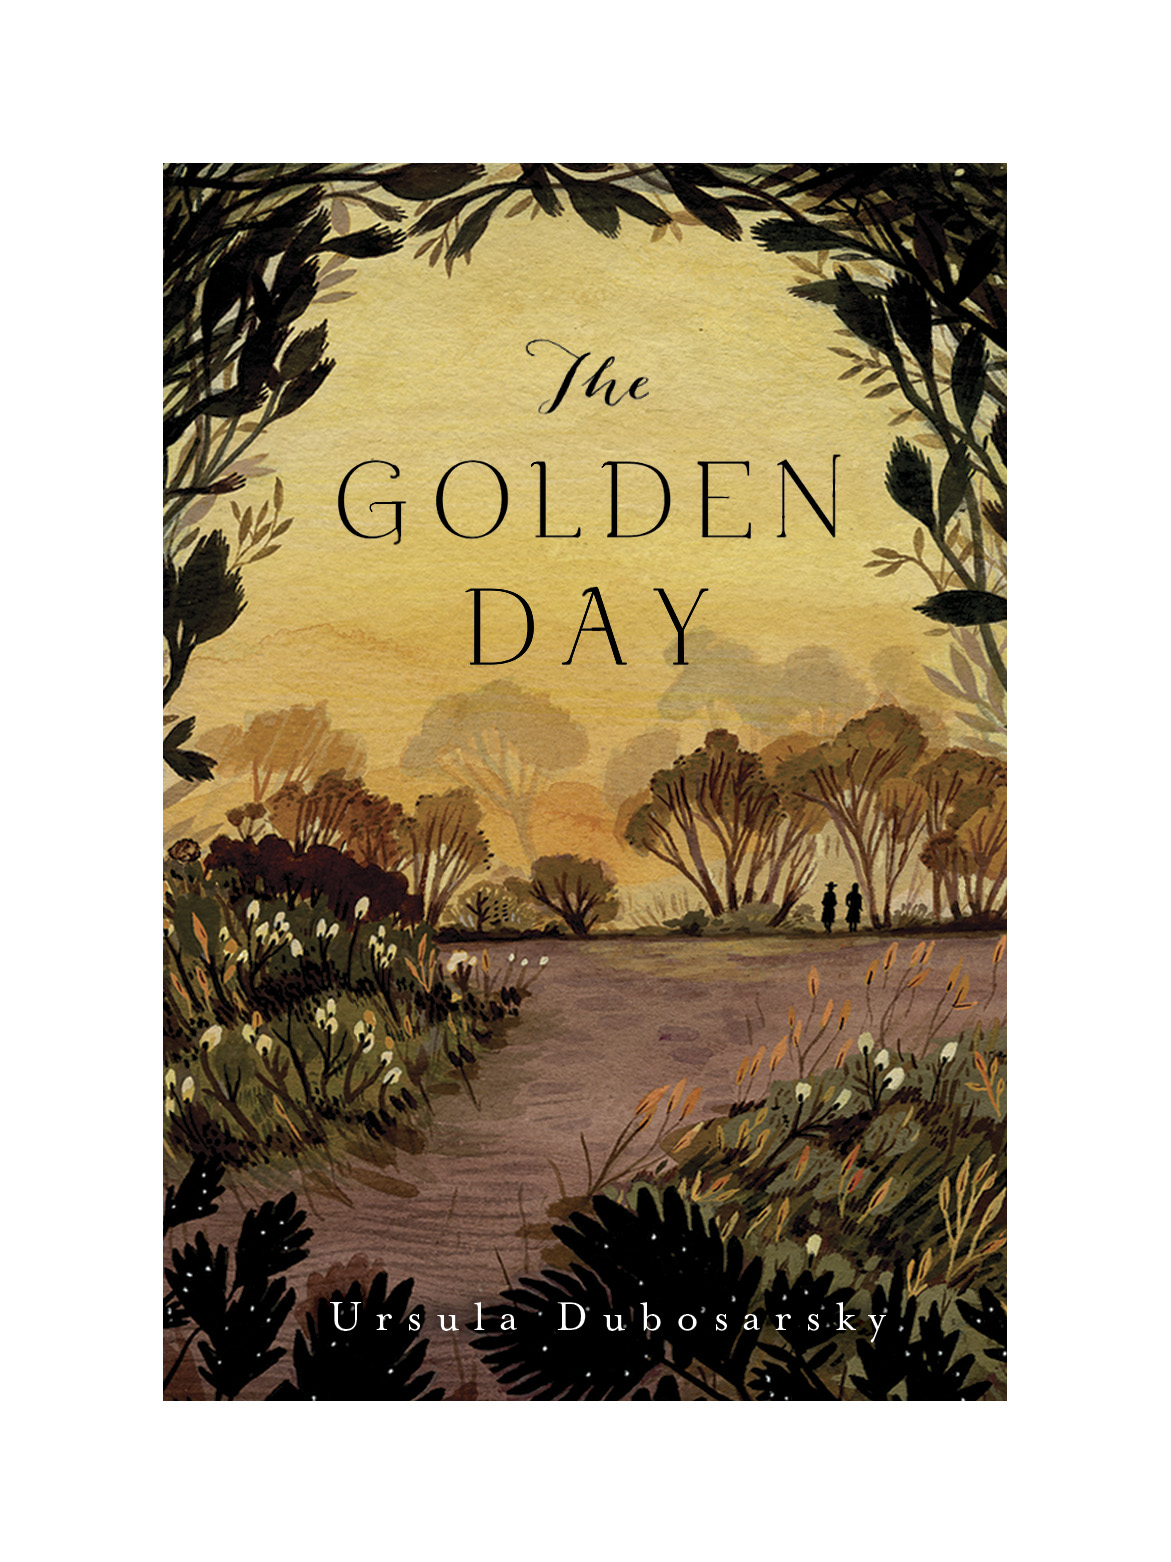 The Golden Day US cover web (1).jpg